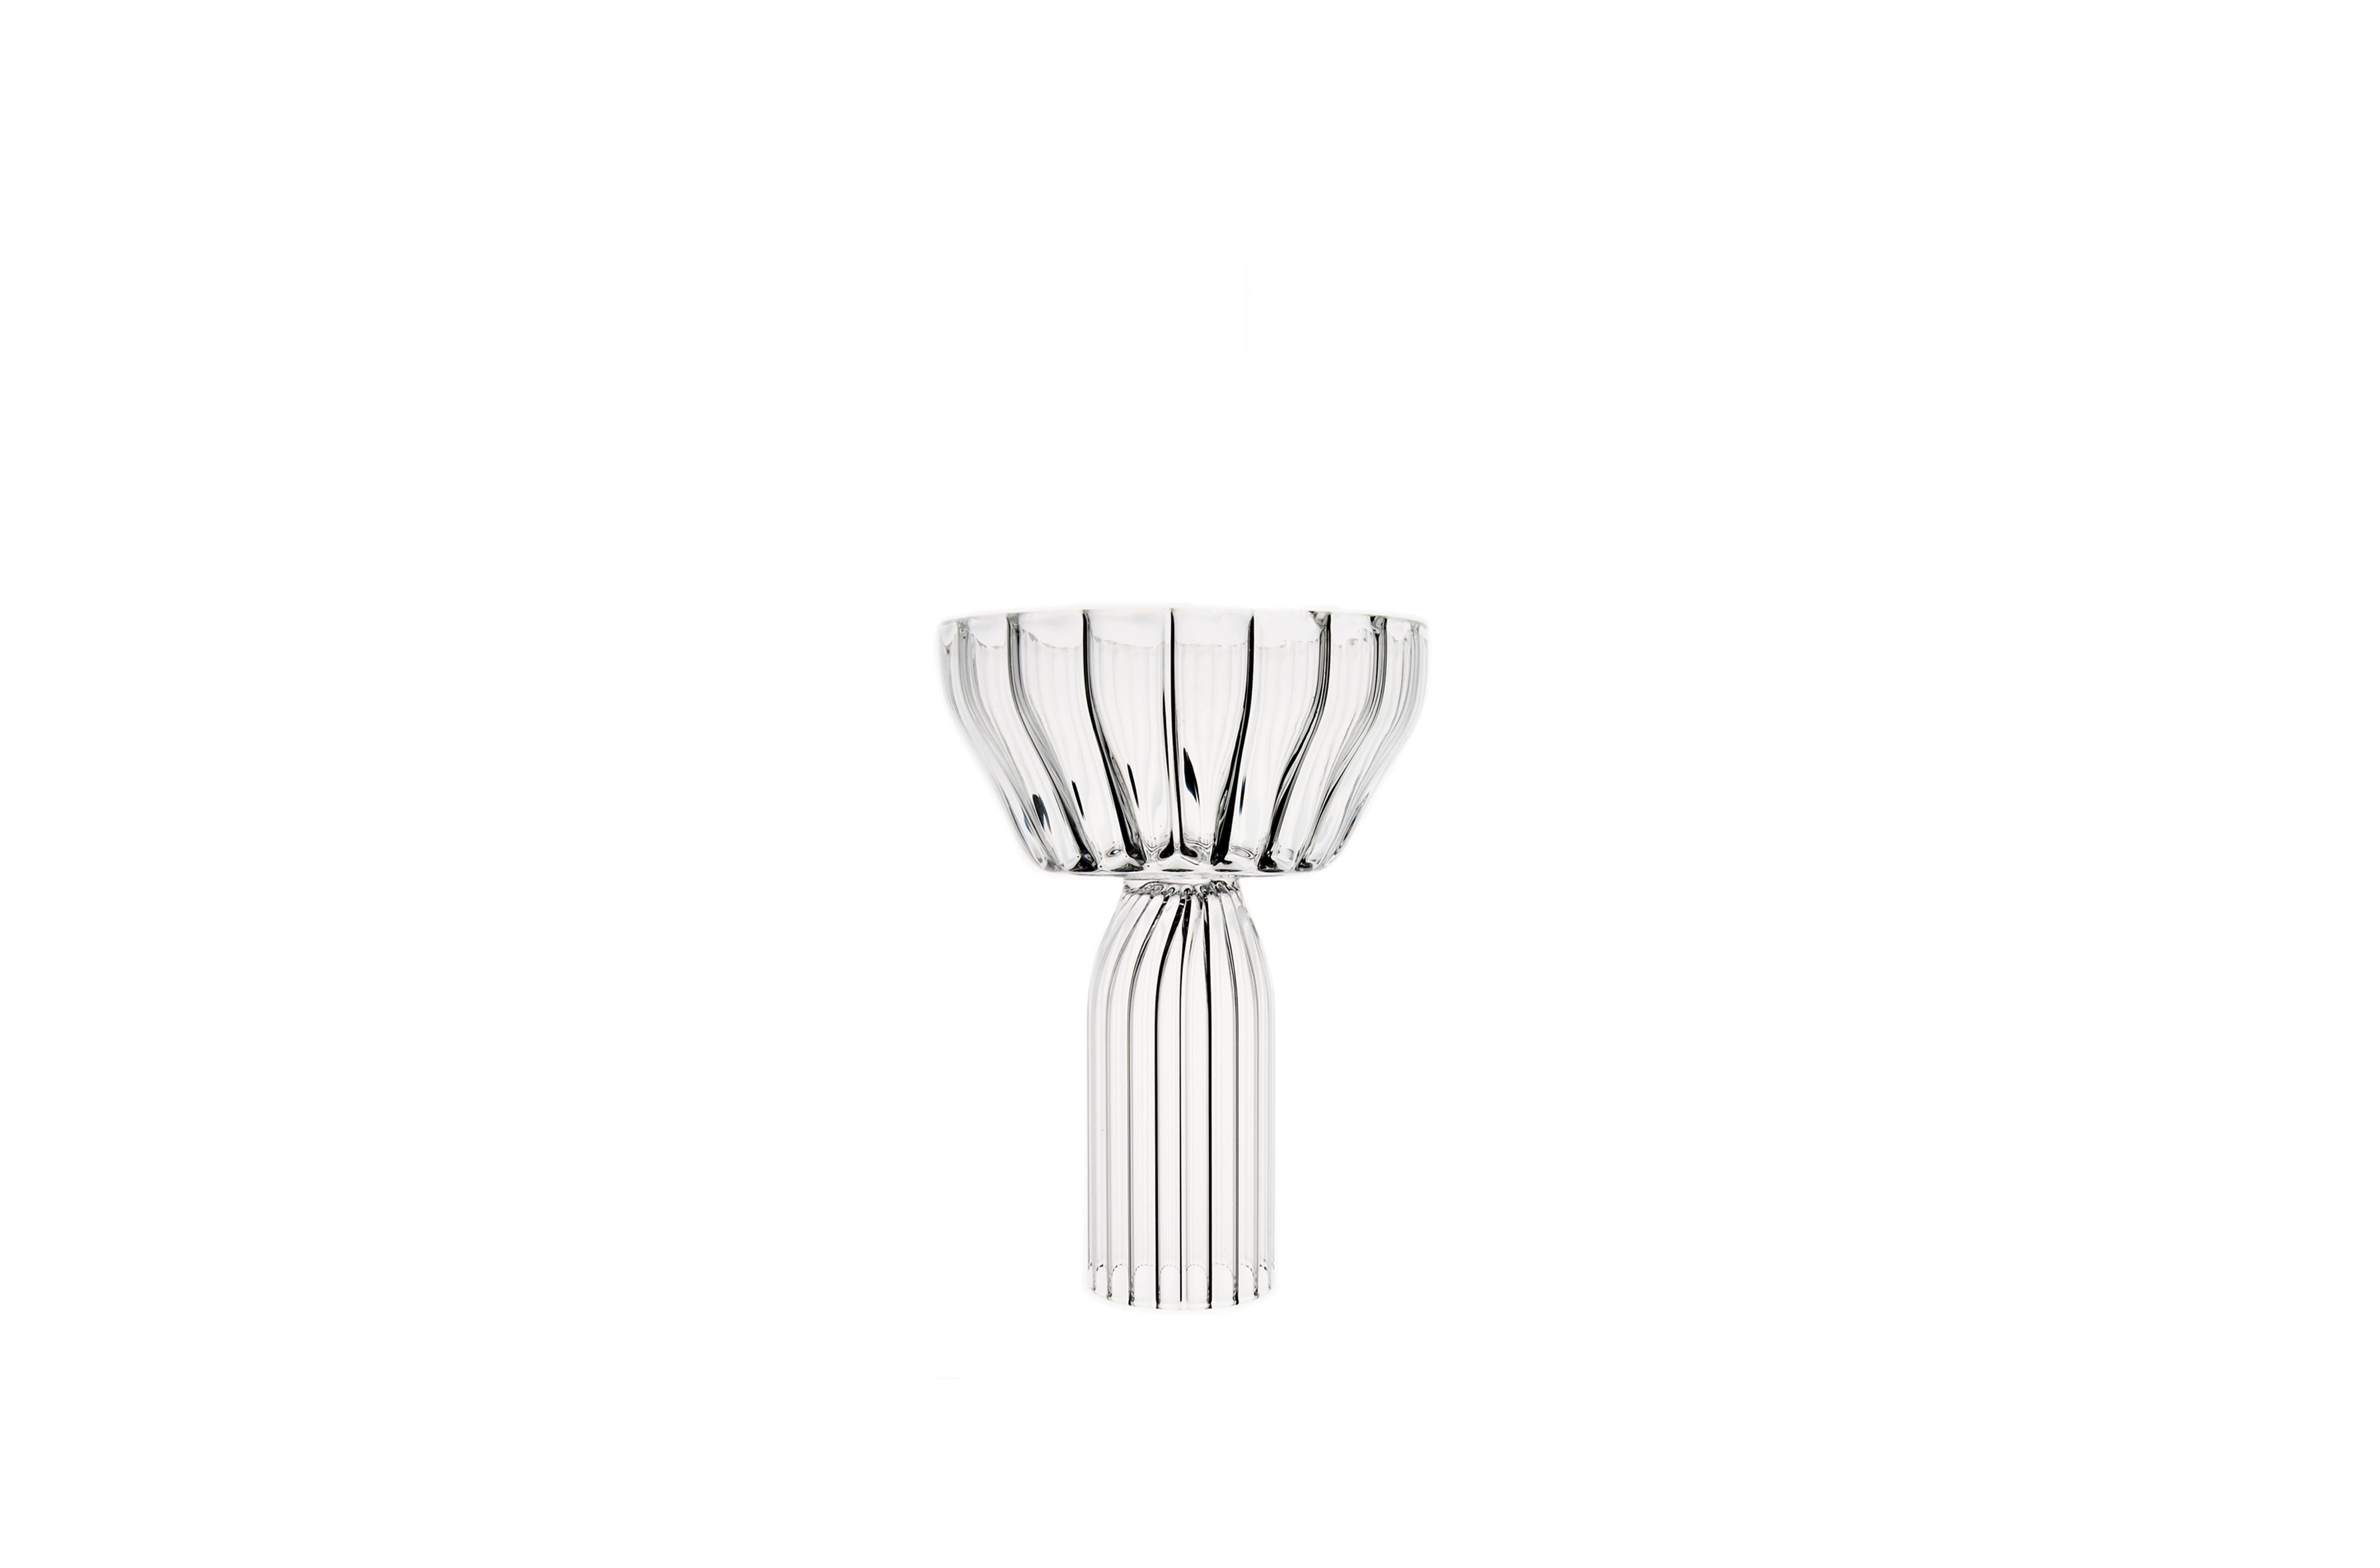 Margot Champagne Coupe is the ideal toasting glass for someone who loves generous details in their table setting. 

The Margot, a maximalist collection expressed through the introduction of fluted borosilicate glass with generous proportions was